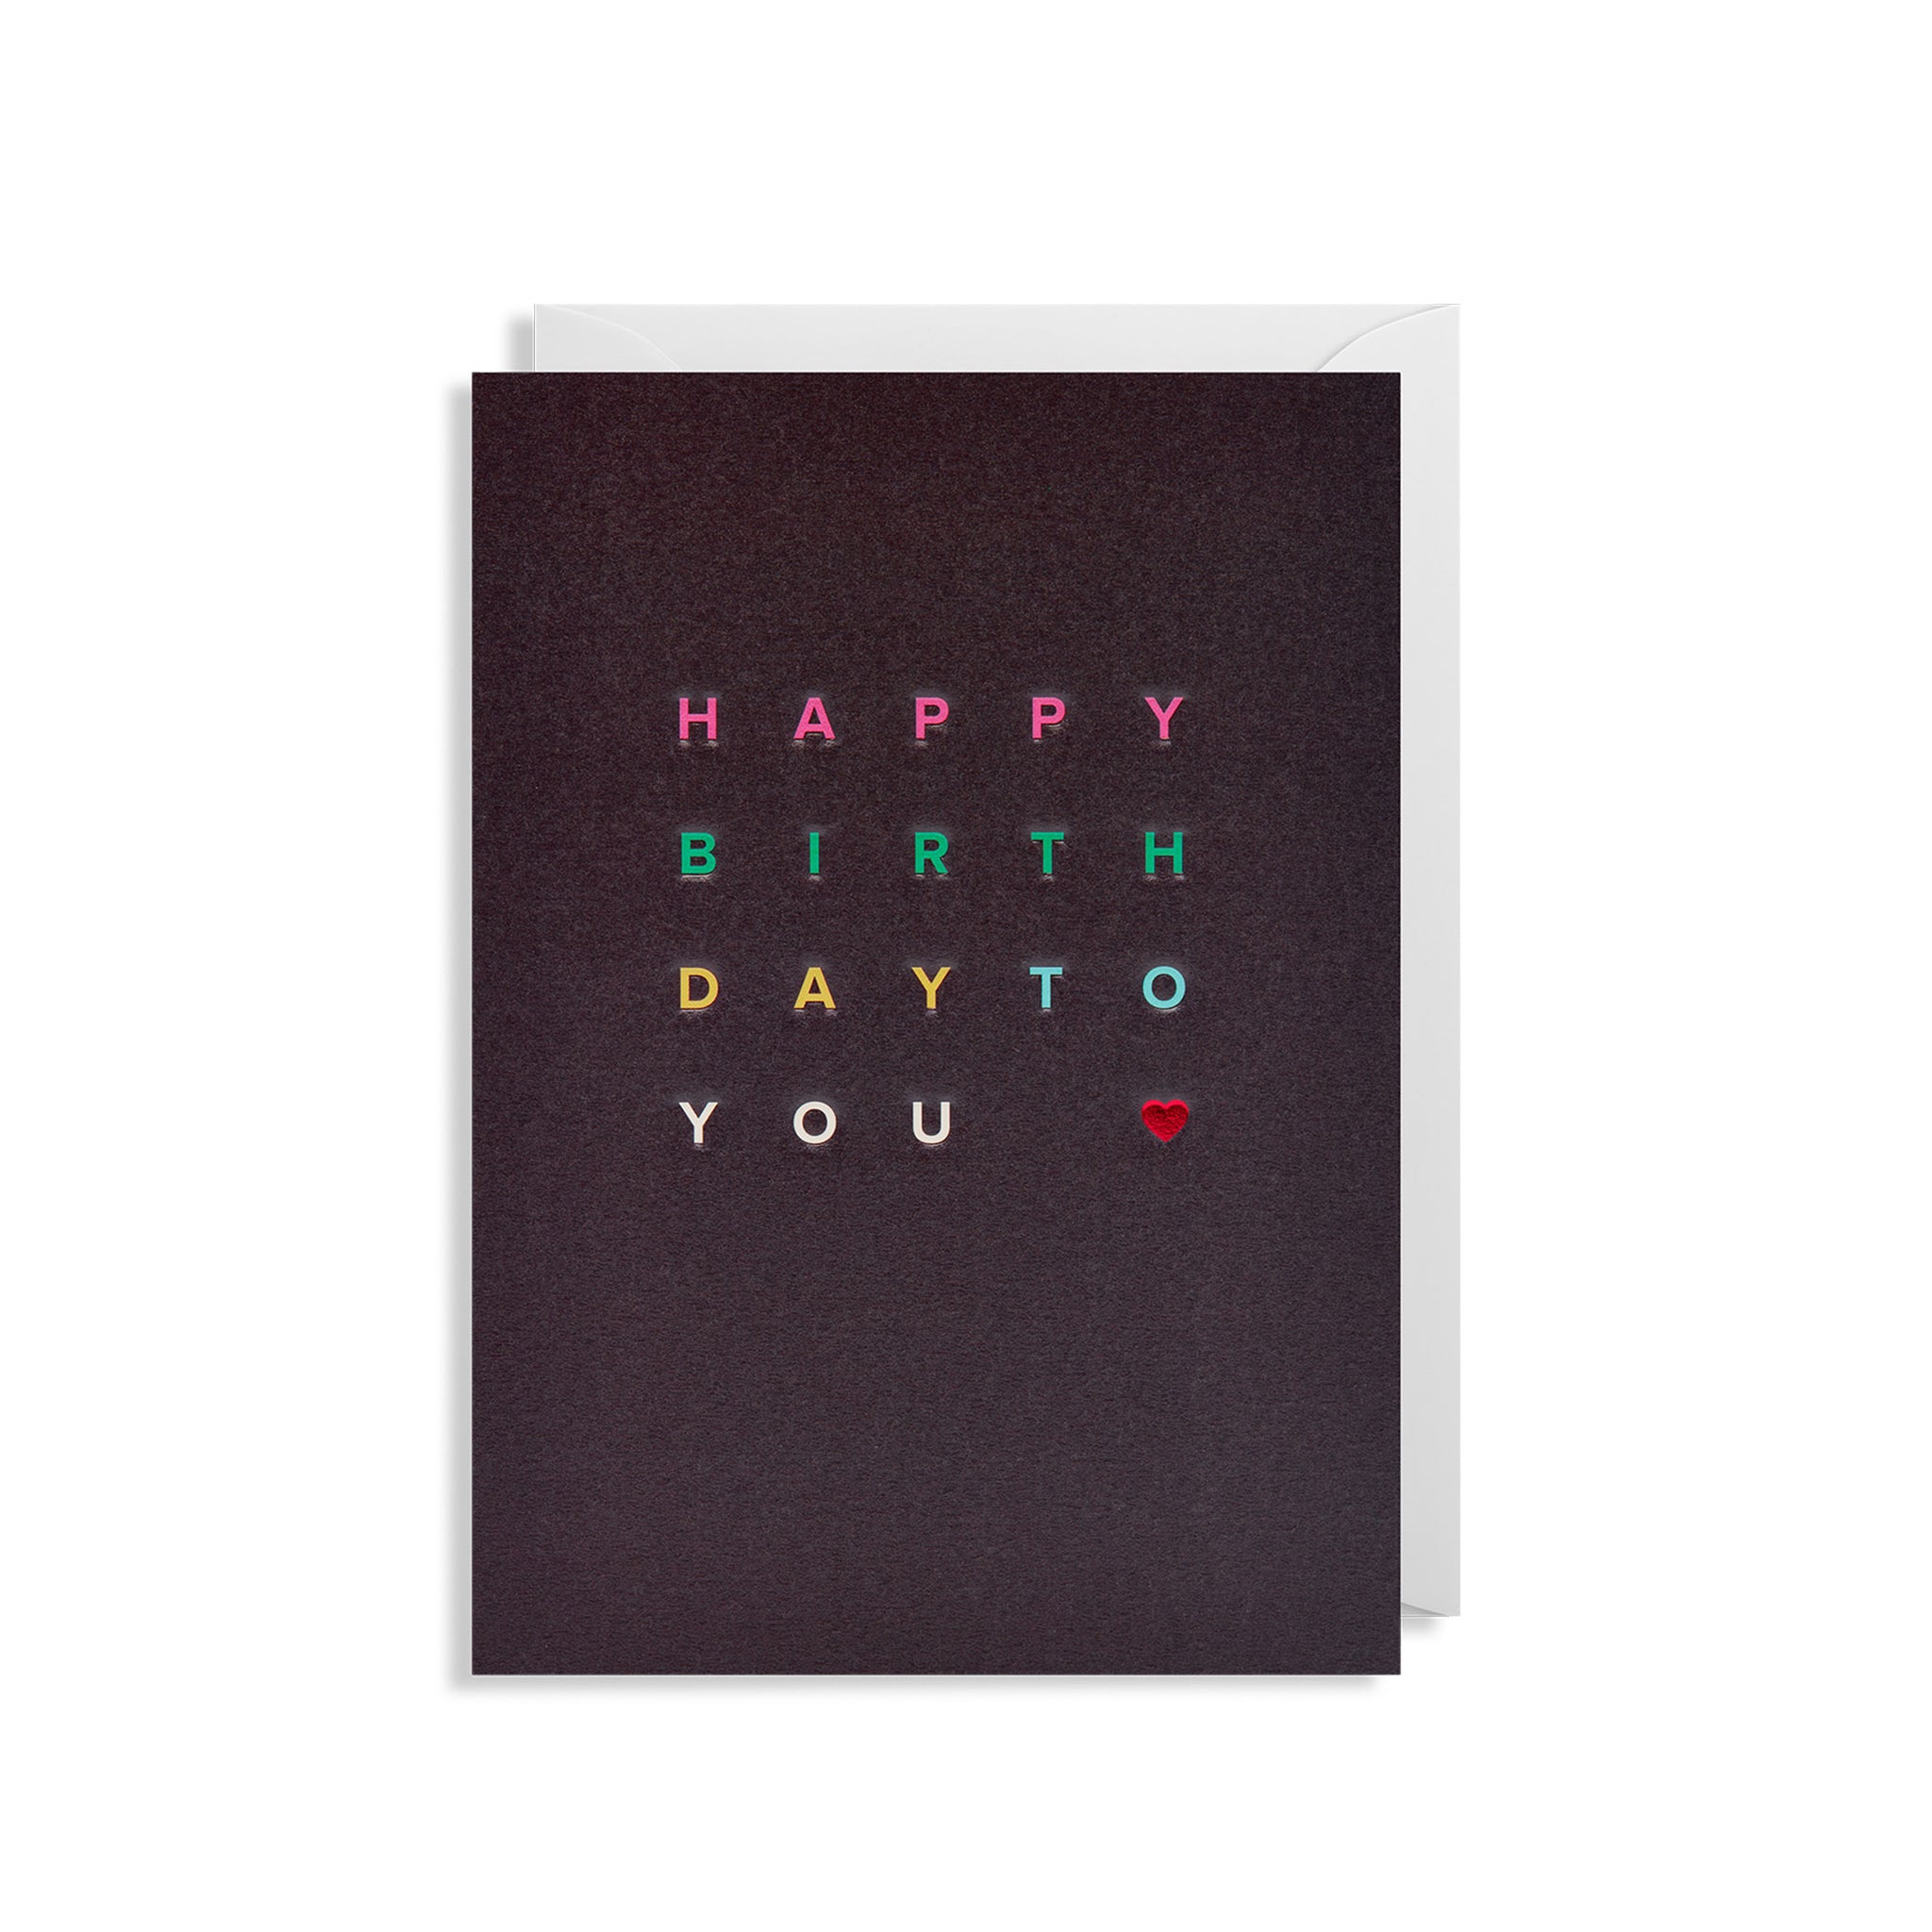 Happy Birthday To You - Greetings Card - Five And Dime